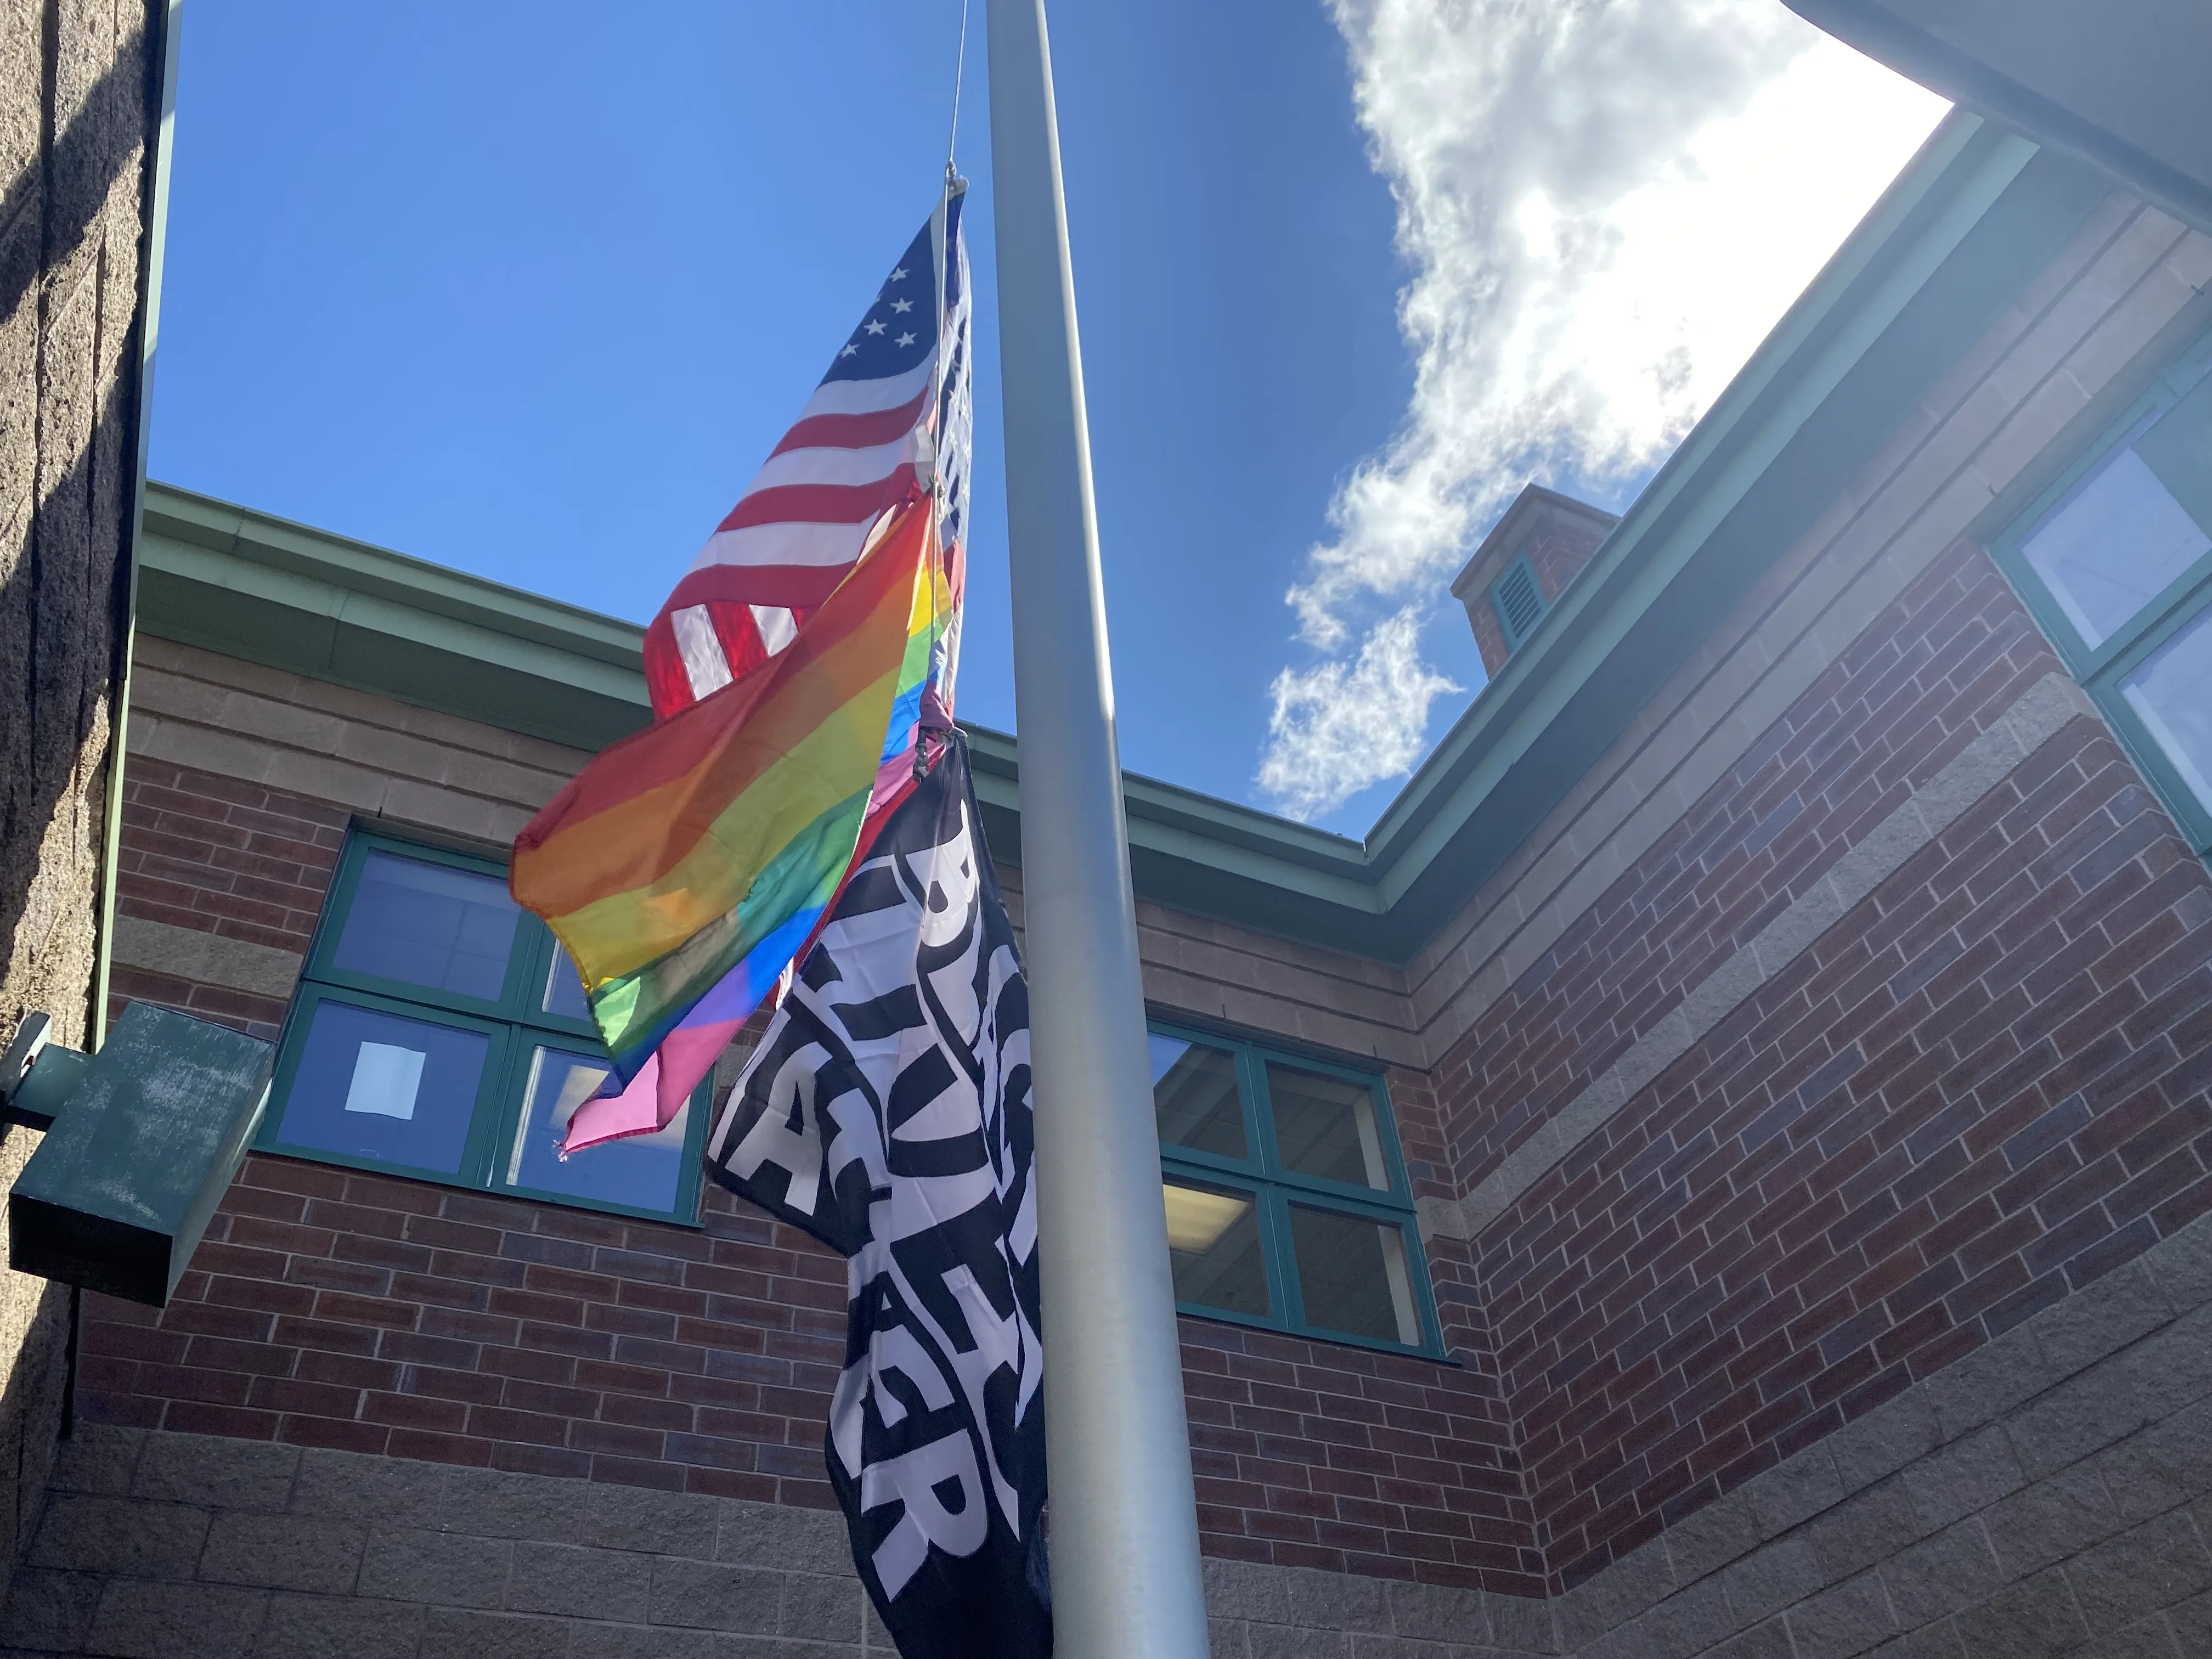 American, gay pride, and BLM flags being flown at Nativity School of Worcester in Worcester, Mass.?w=200&h=150